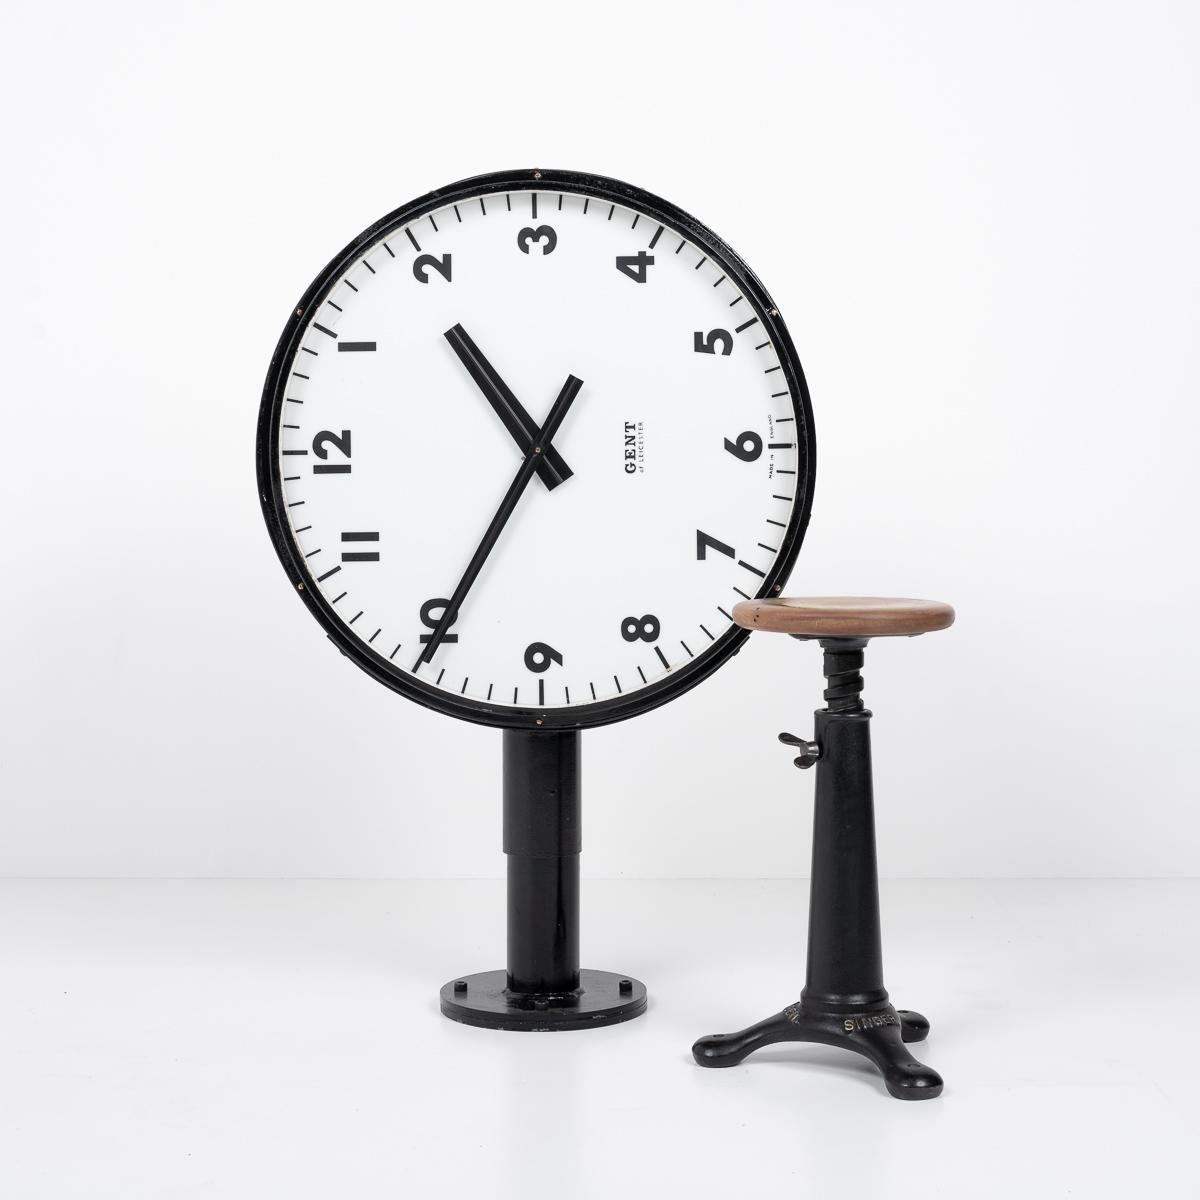 1960S DOUBLE-SIDED ILLUMINATED RAILWAY STATION CLOCK

A stunning double-sided illuminated railway station clock, crafted by the renowned Great British Clock maker, Gents of Leicester, circa 1960.

This iconic timepiece boasts a sleek